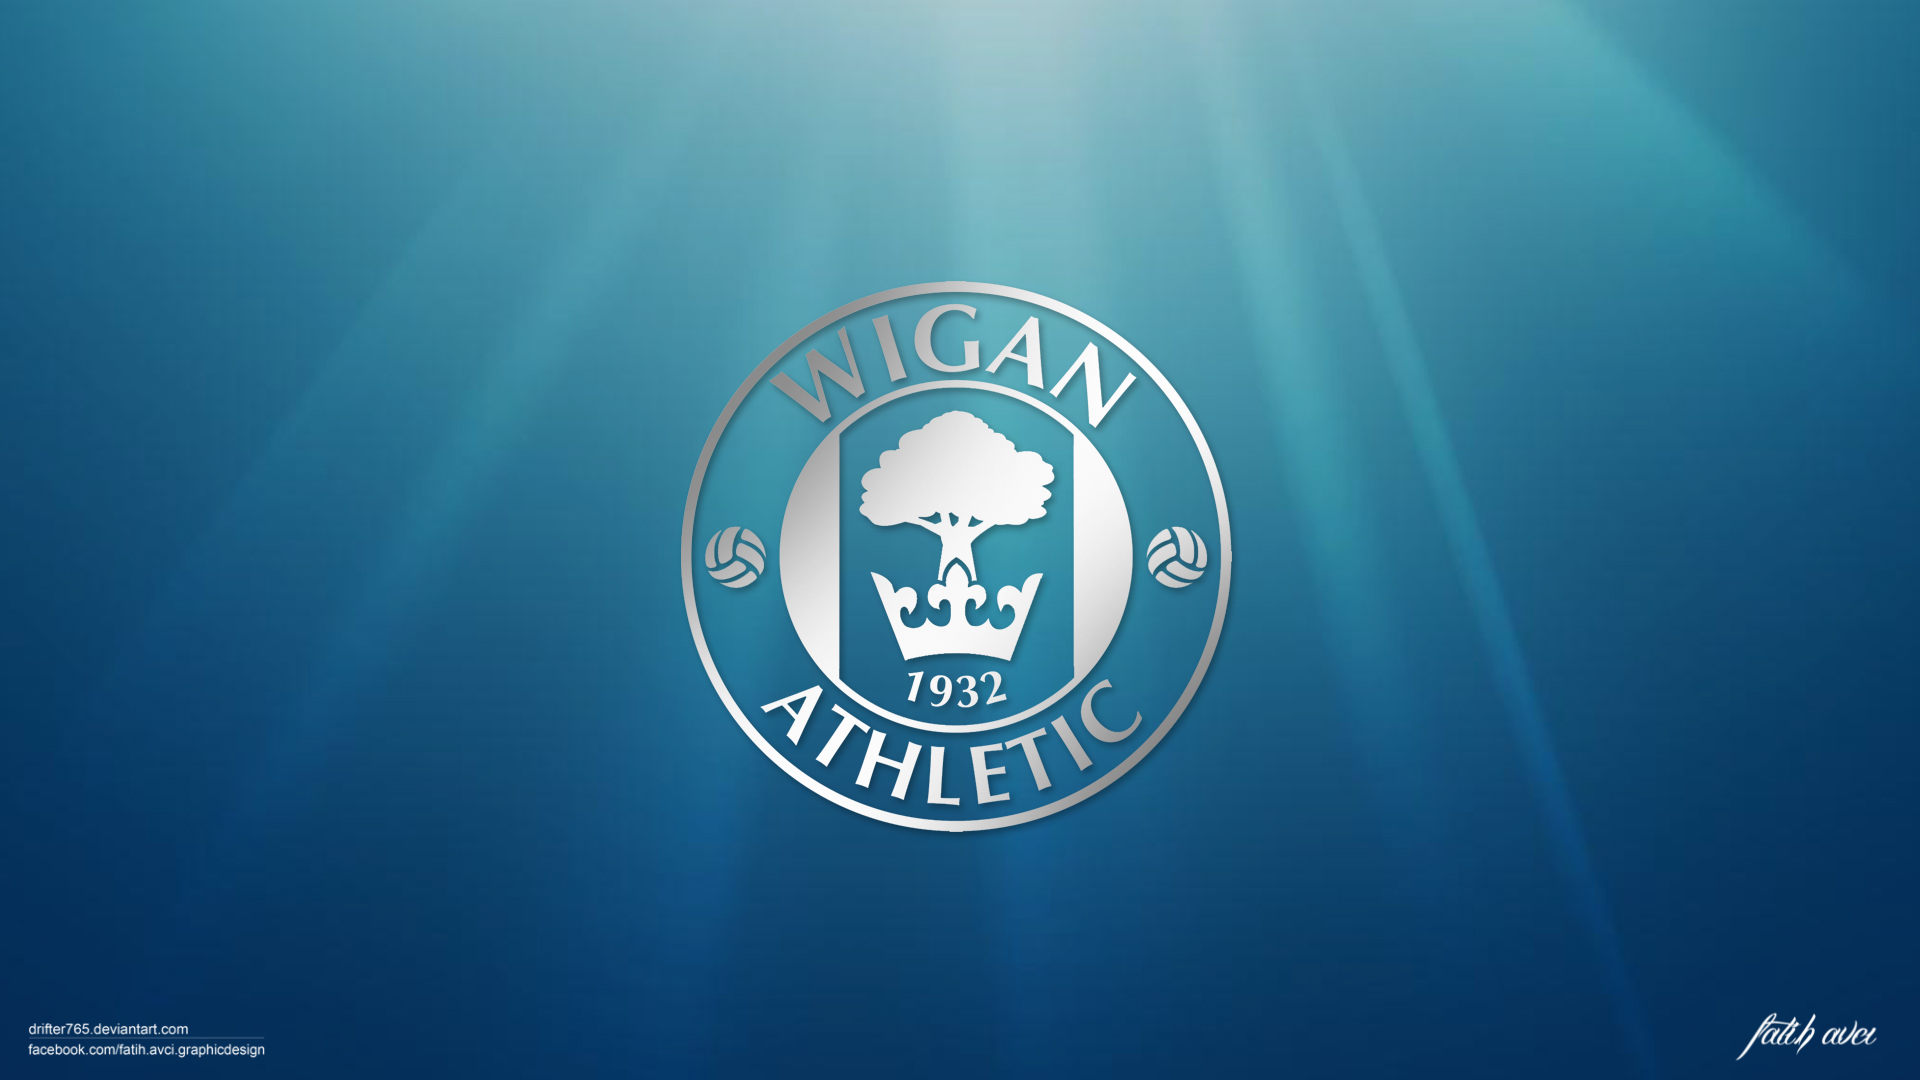 Wigan Athletic background Wigan Athletic wallpapers